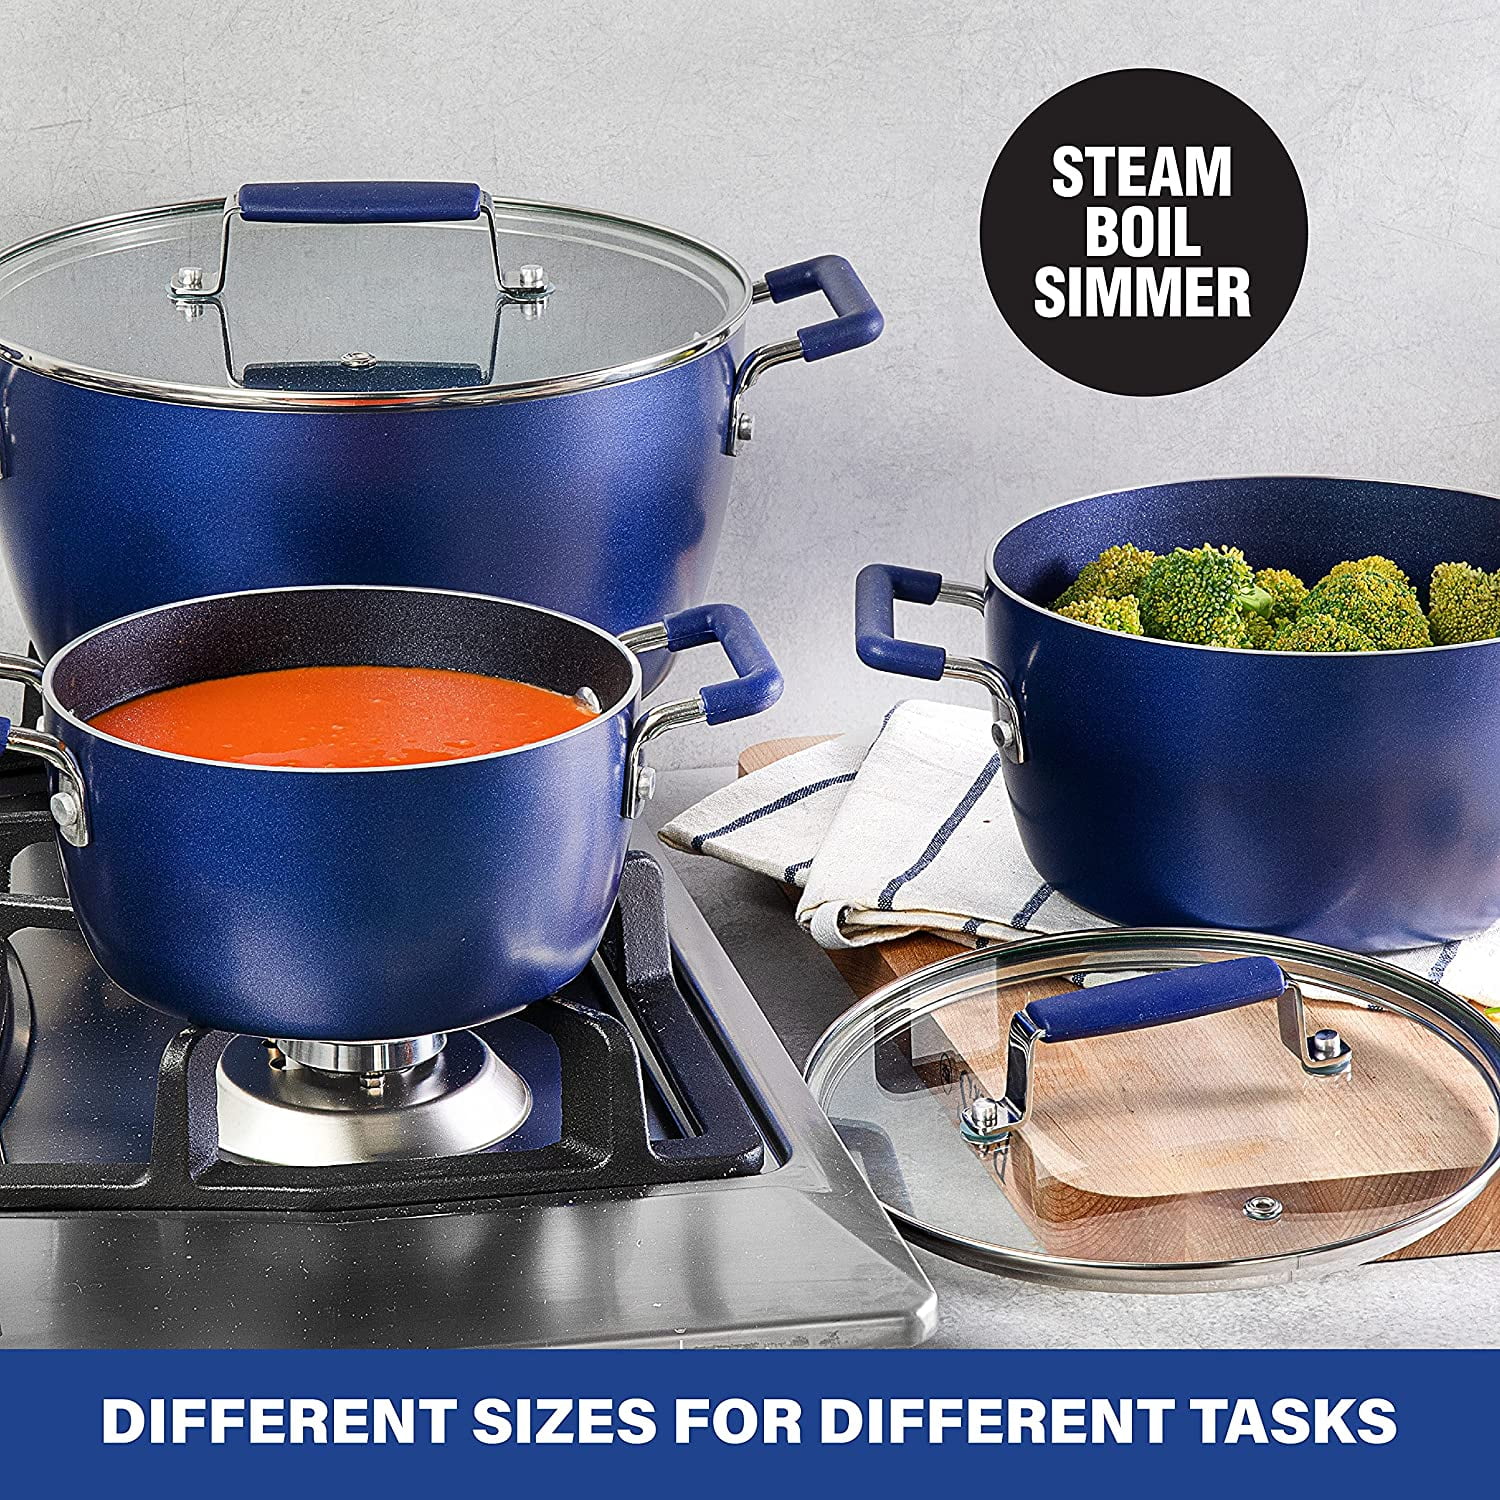 This Granite Cookware Set Is a Kitchen Space Saver -- And It's 53% Off